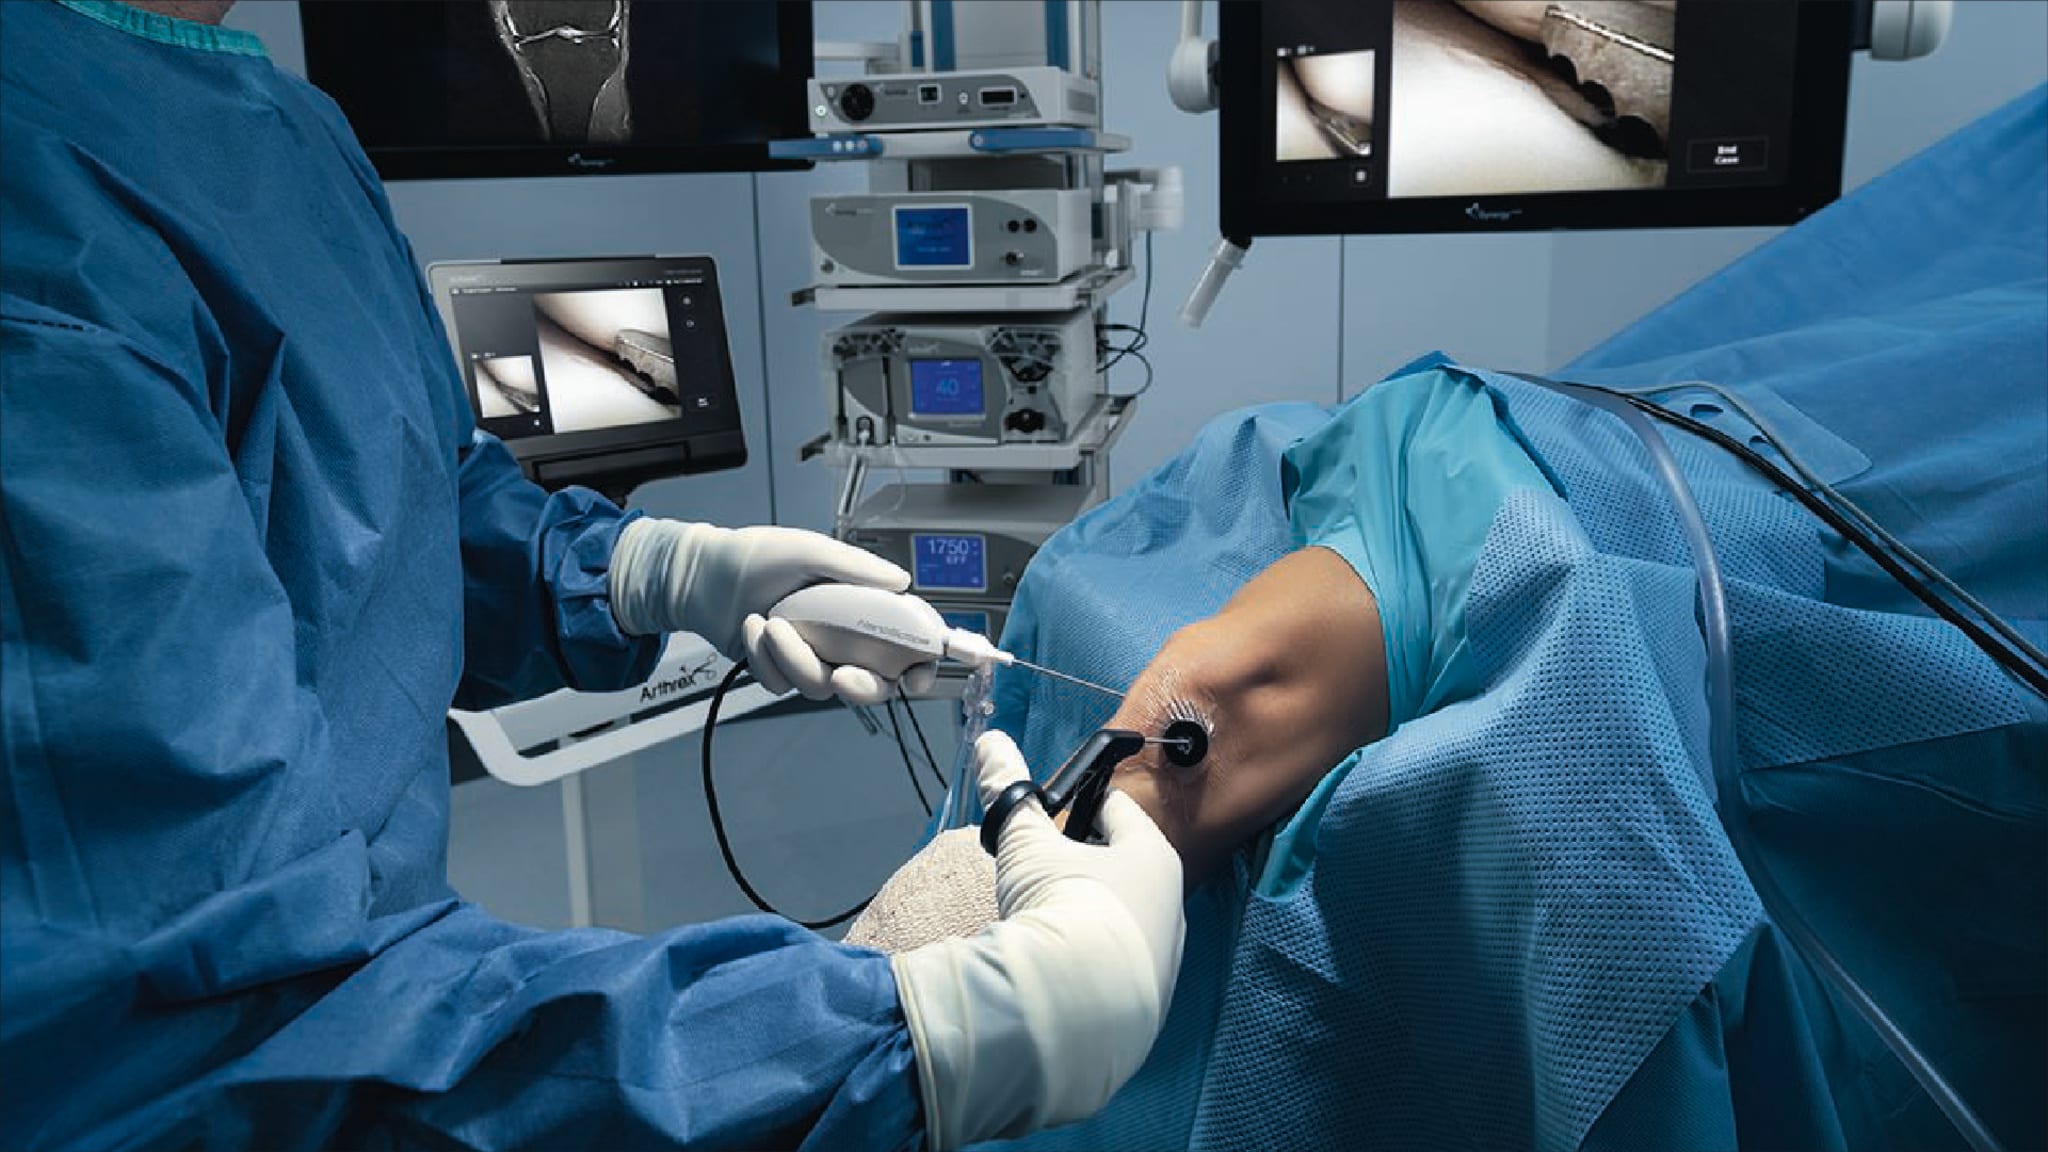 Incisionless Partial Medial Meniscectomy With the NanoScope™ Operative Arthroscopy System